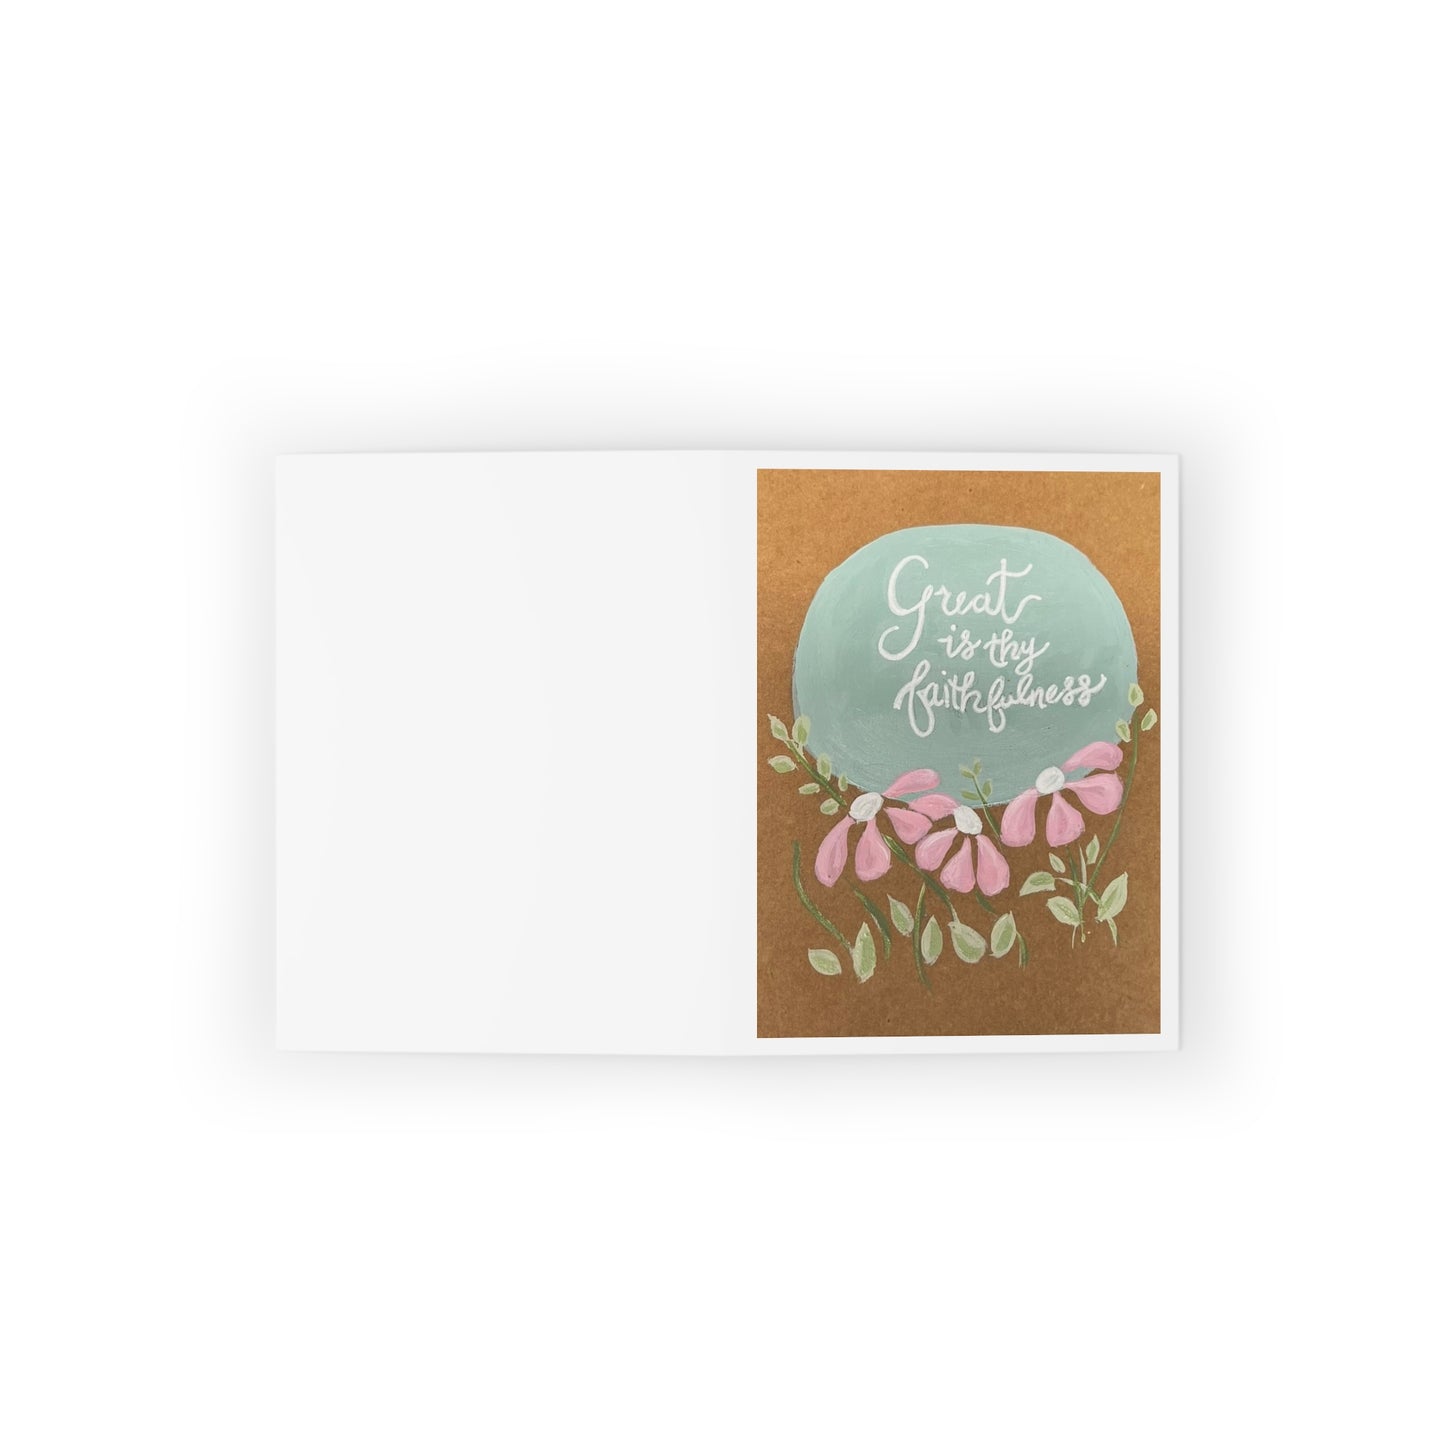 Great is Thy Faithfulness - White - Greeting cards (8, 16, and 24 pcs)